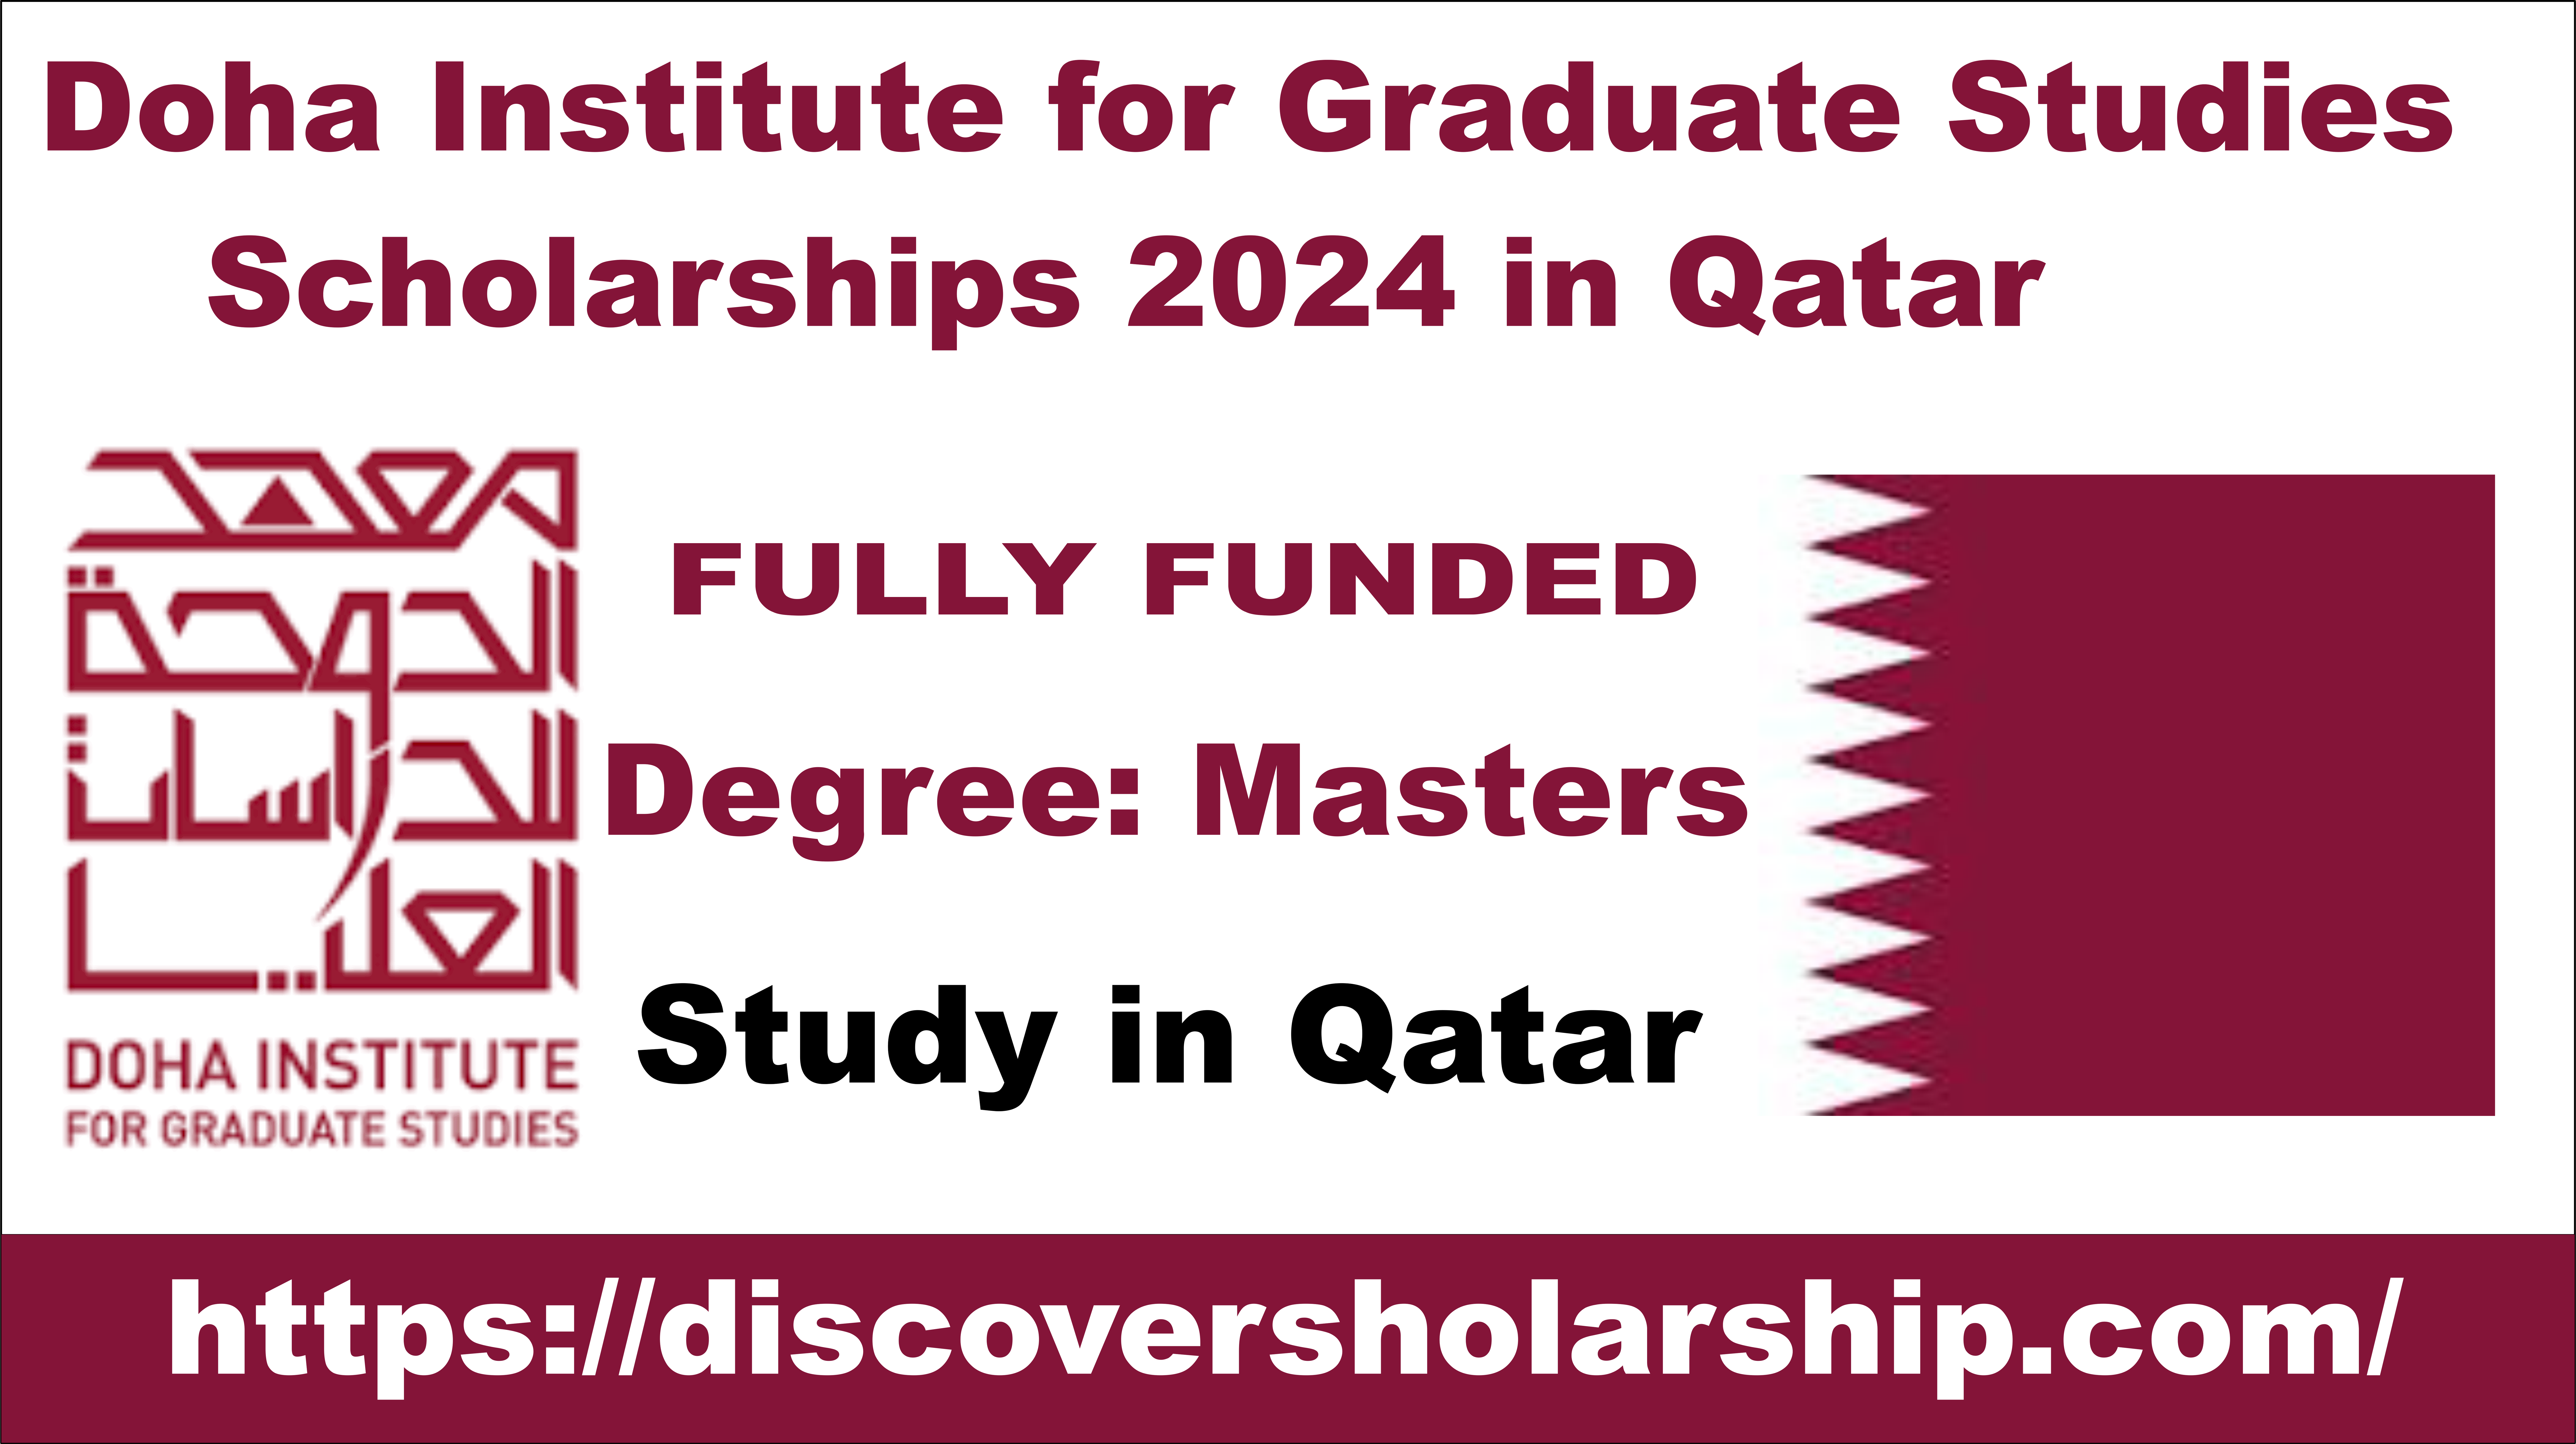 Doha Institute for Graduate Studies Scholarships 2024 in Qatar (Fully Funded)